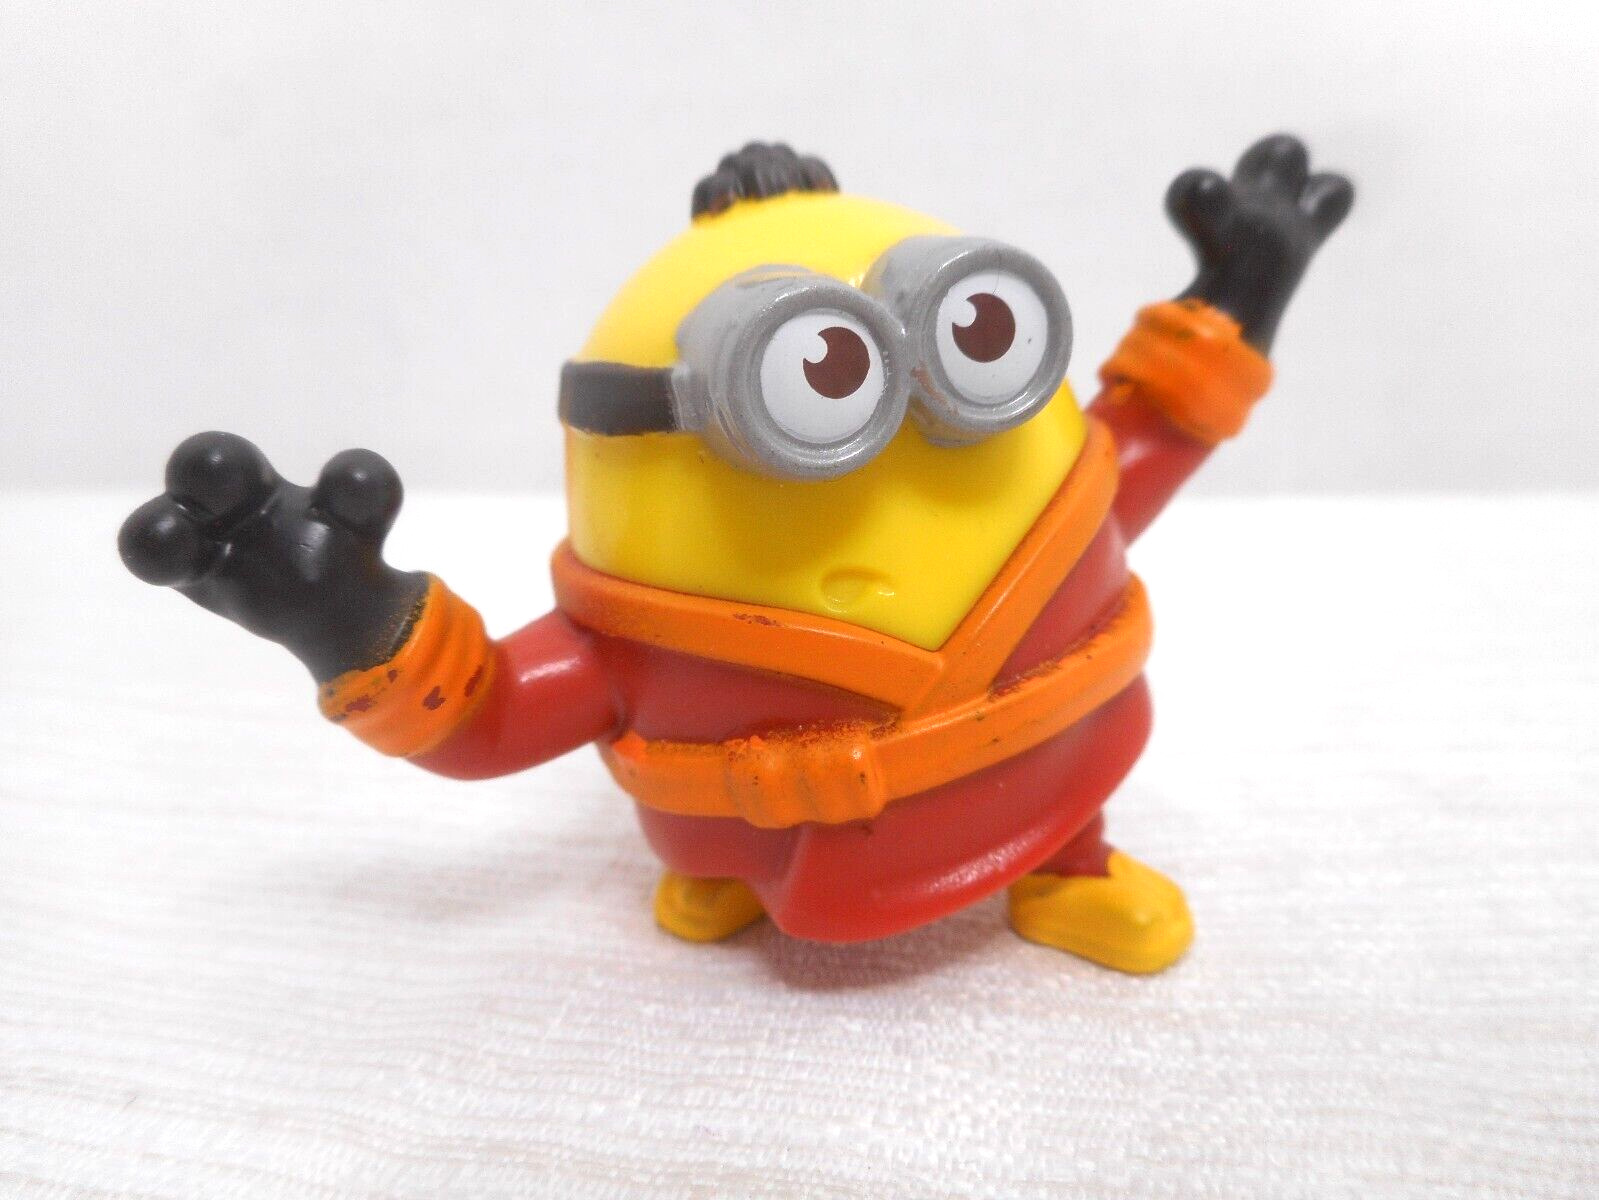 2019 Despicable Me Minion McDonald’s Toy Figure Collectible in Red Robe 2 Eyes